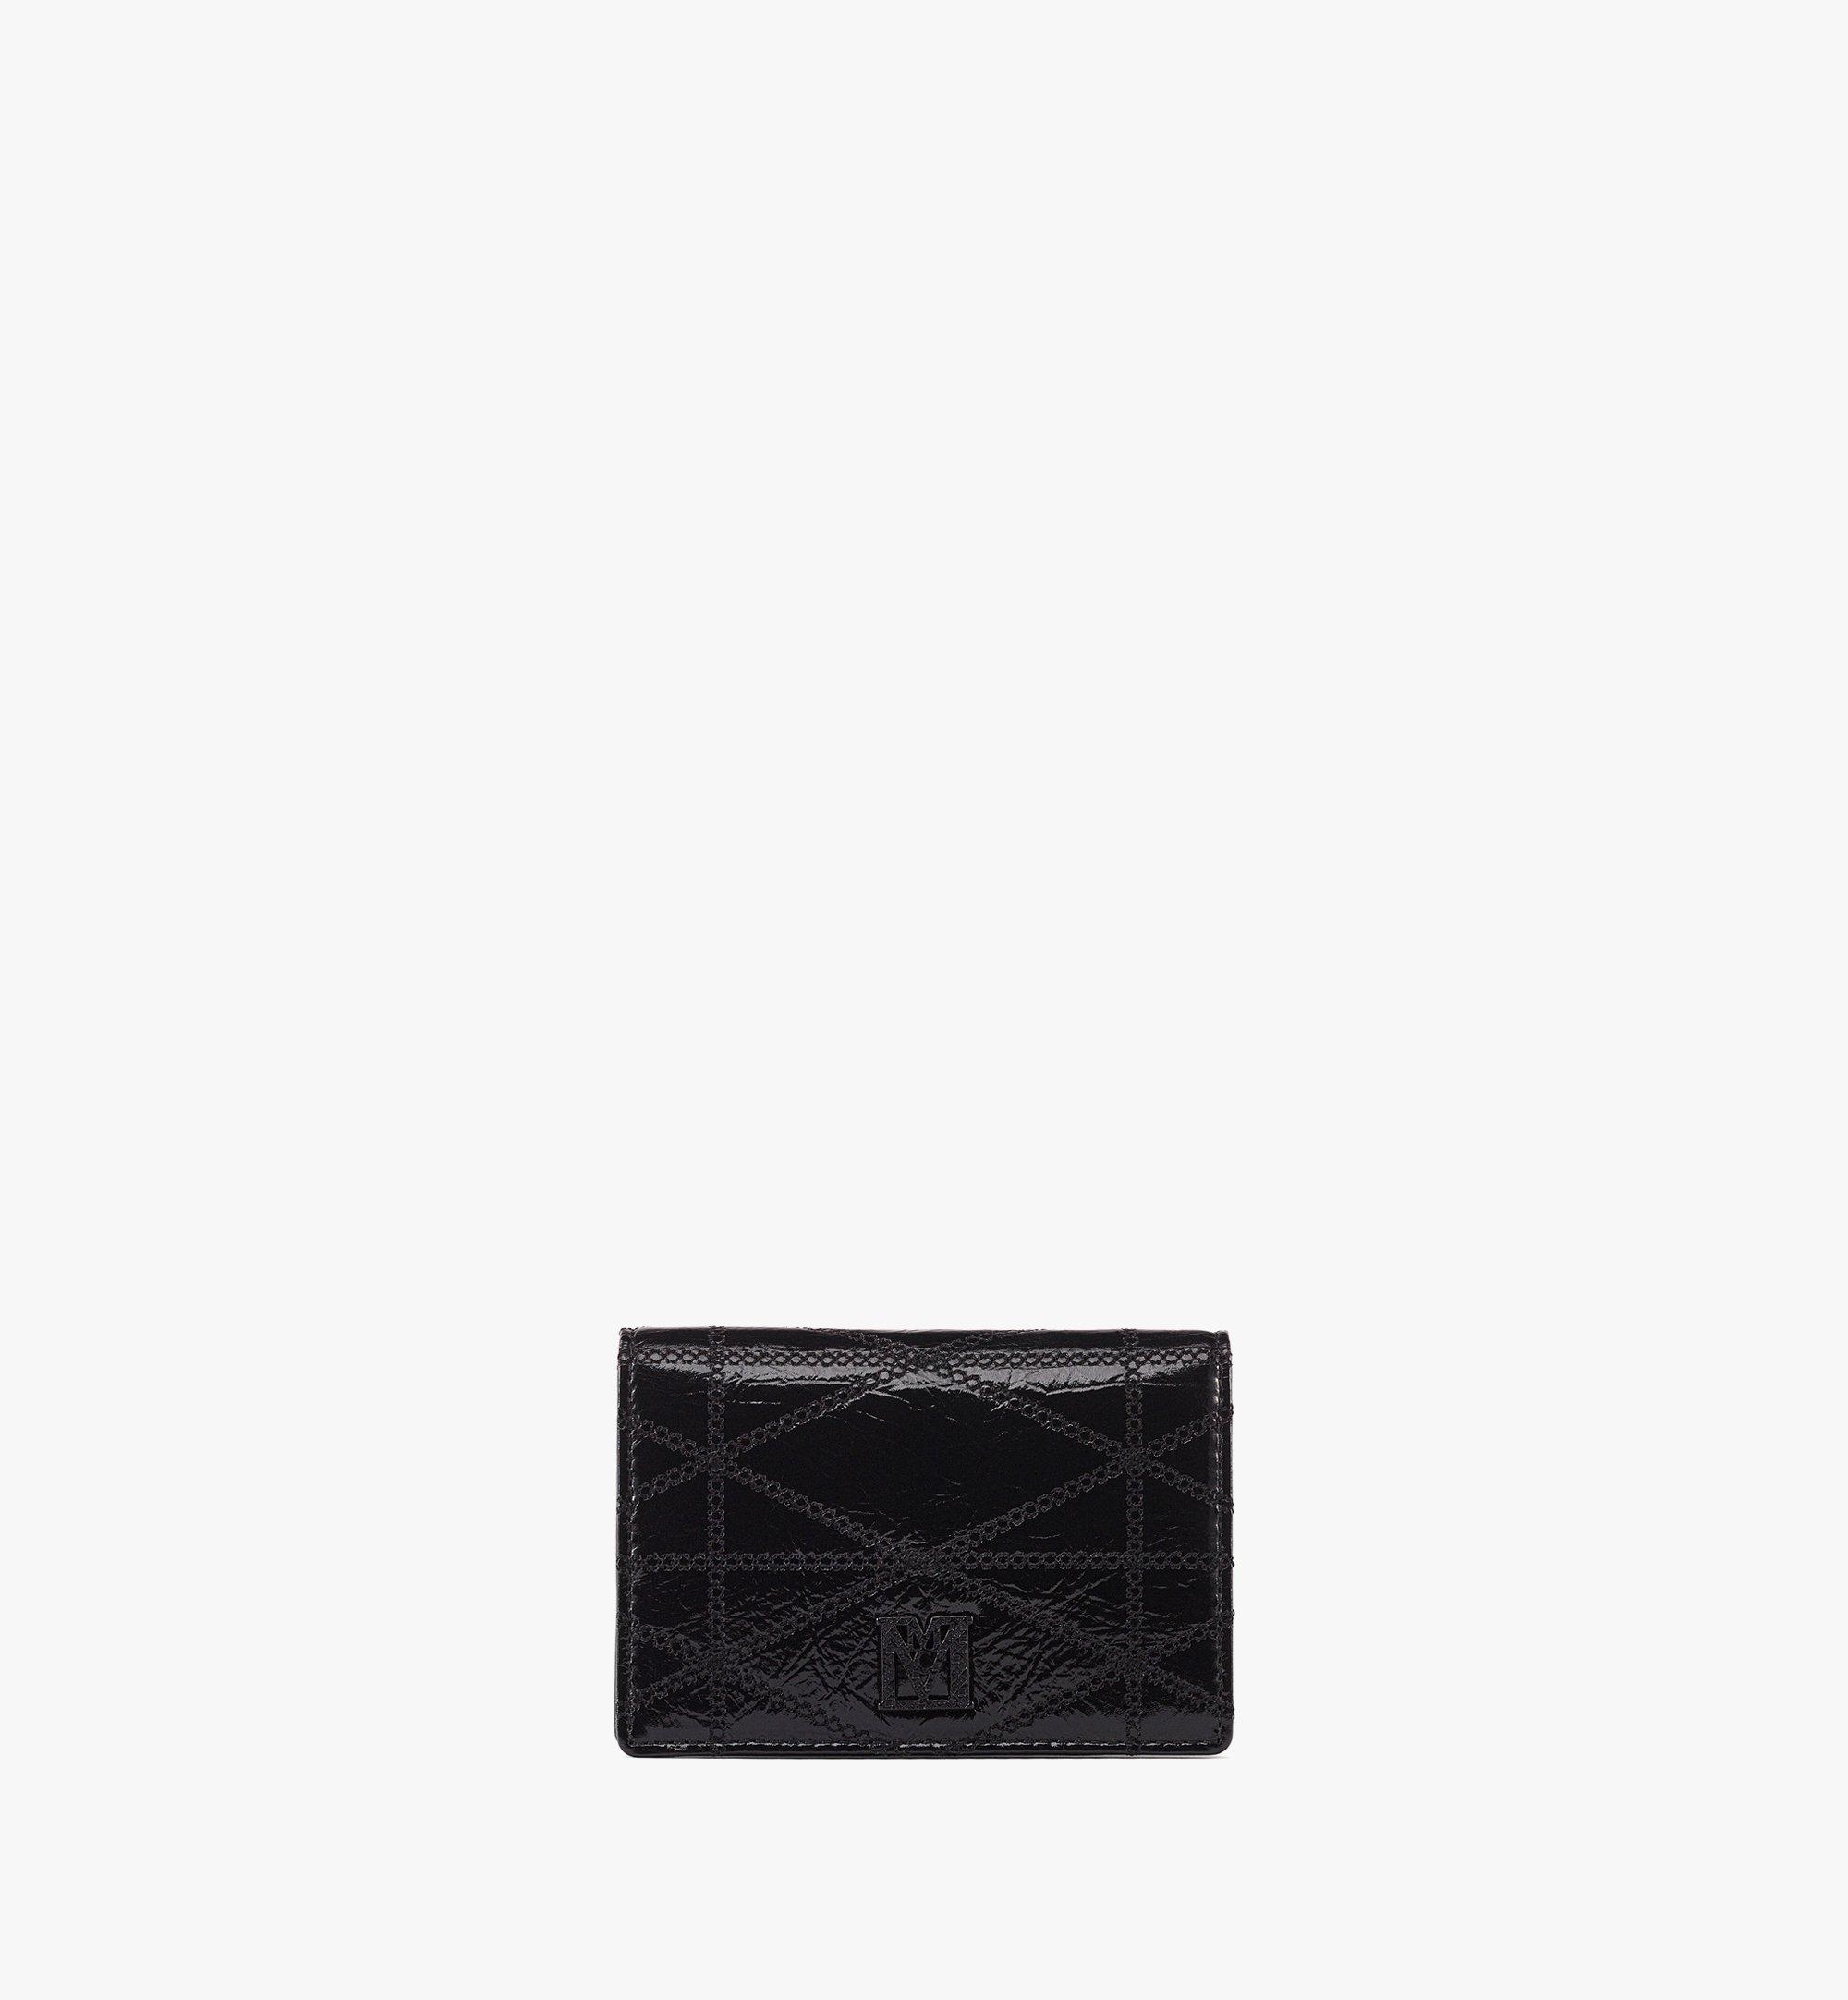 MCM Travia Quilted Card Wallet in Crushed Leather Black MYADALM01BK001 Alternate View 1